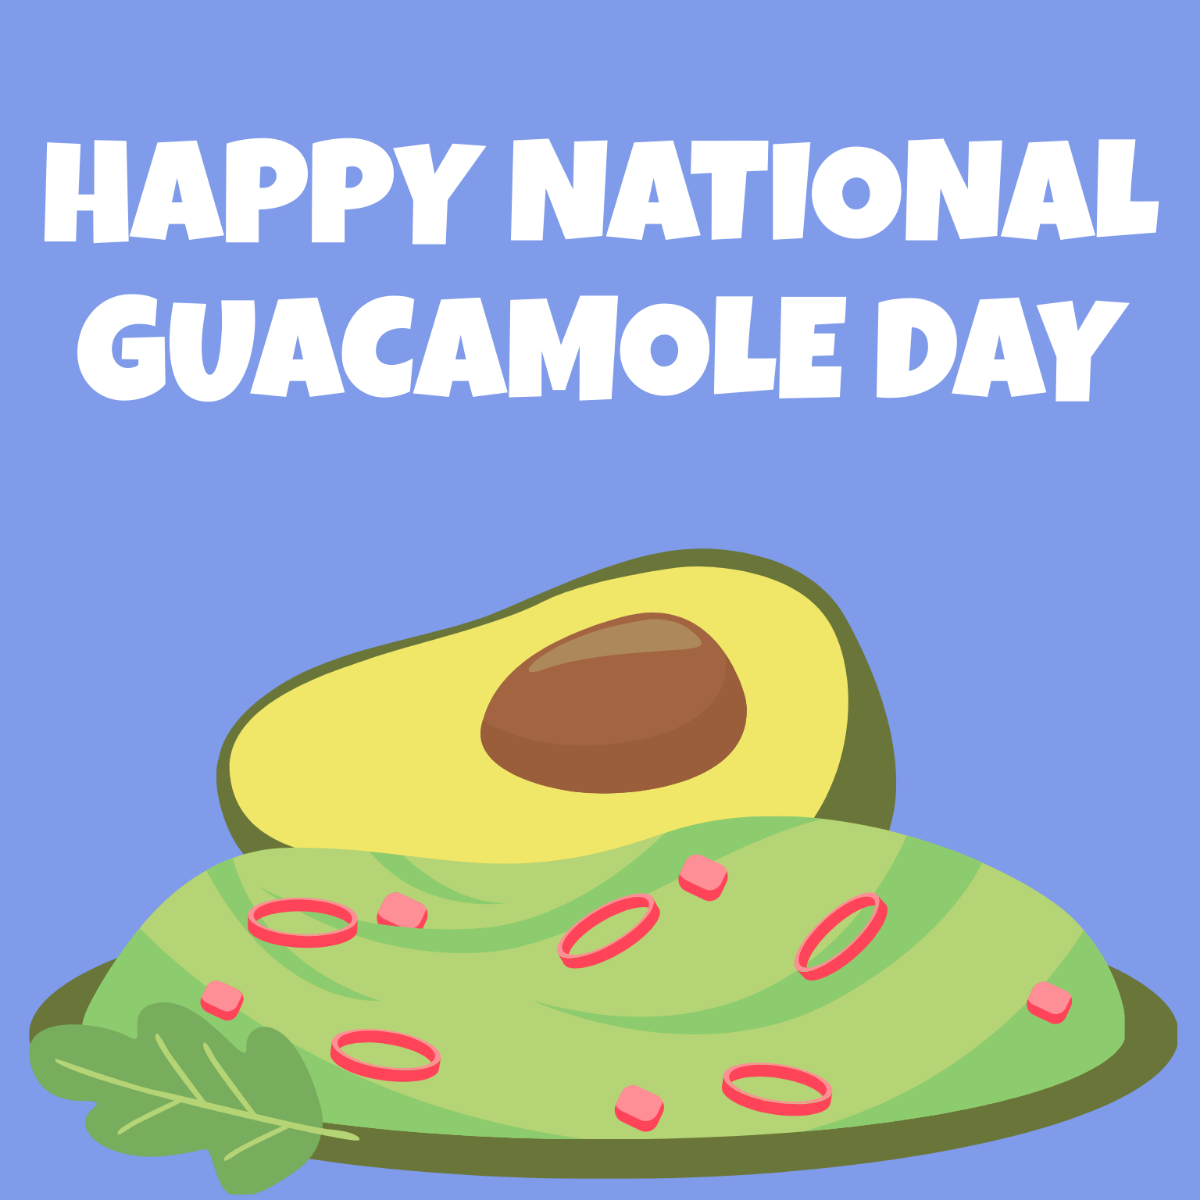 Free Happy National Guacamole Day Illustration Template